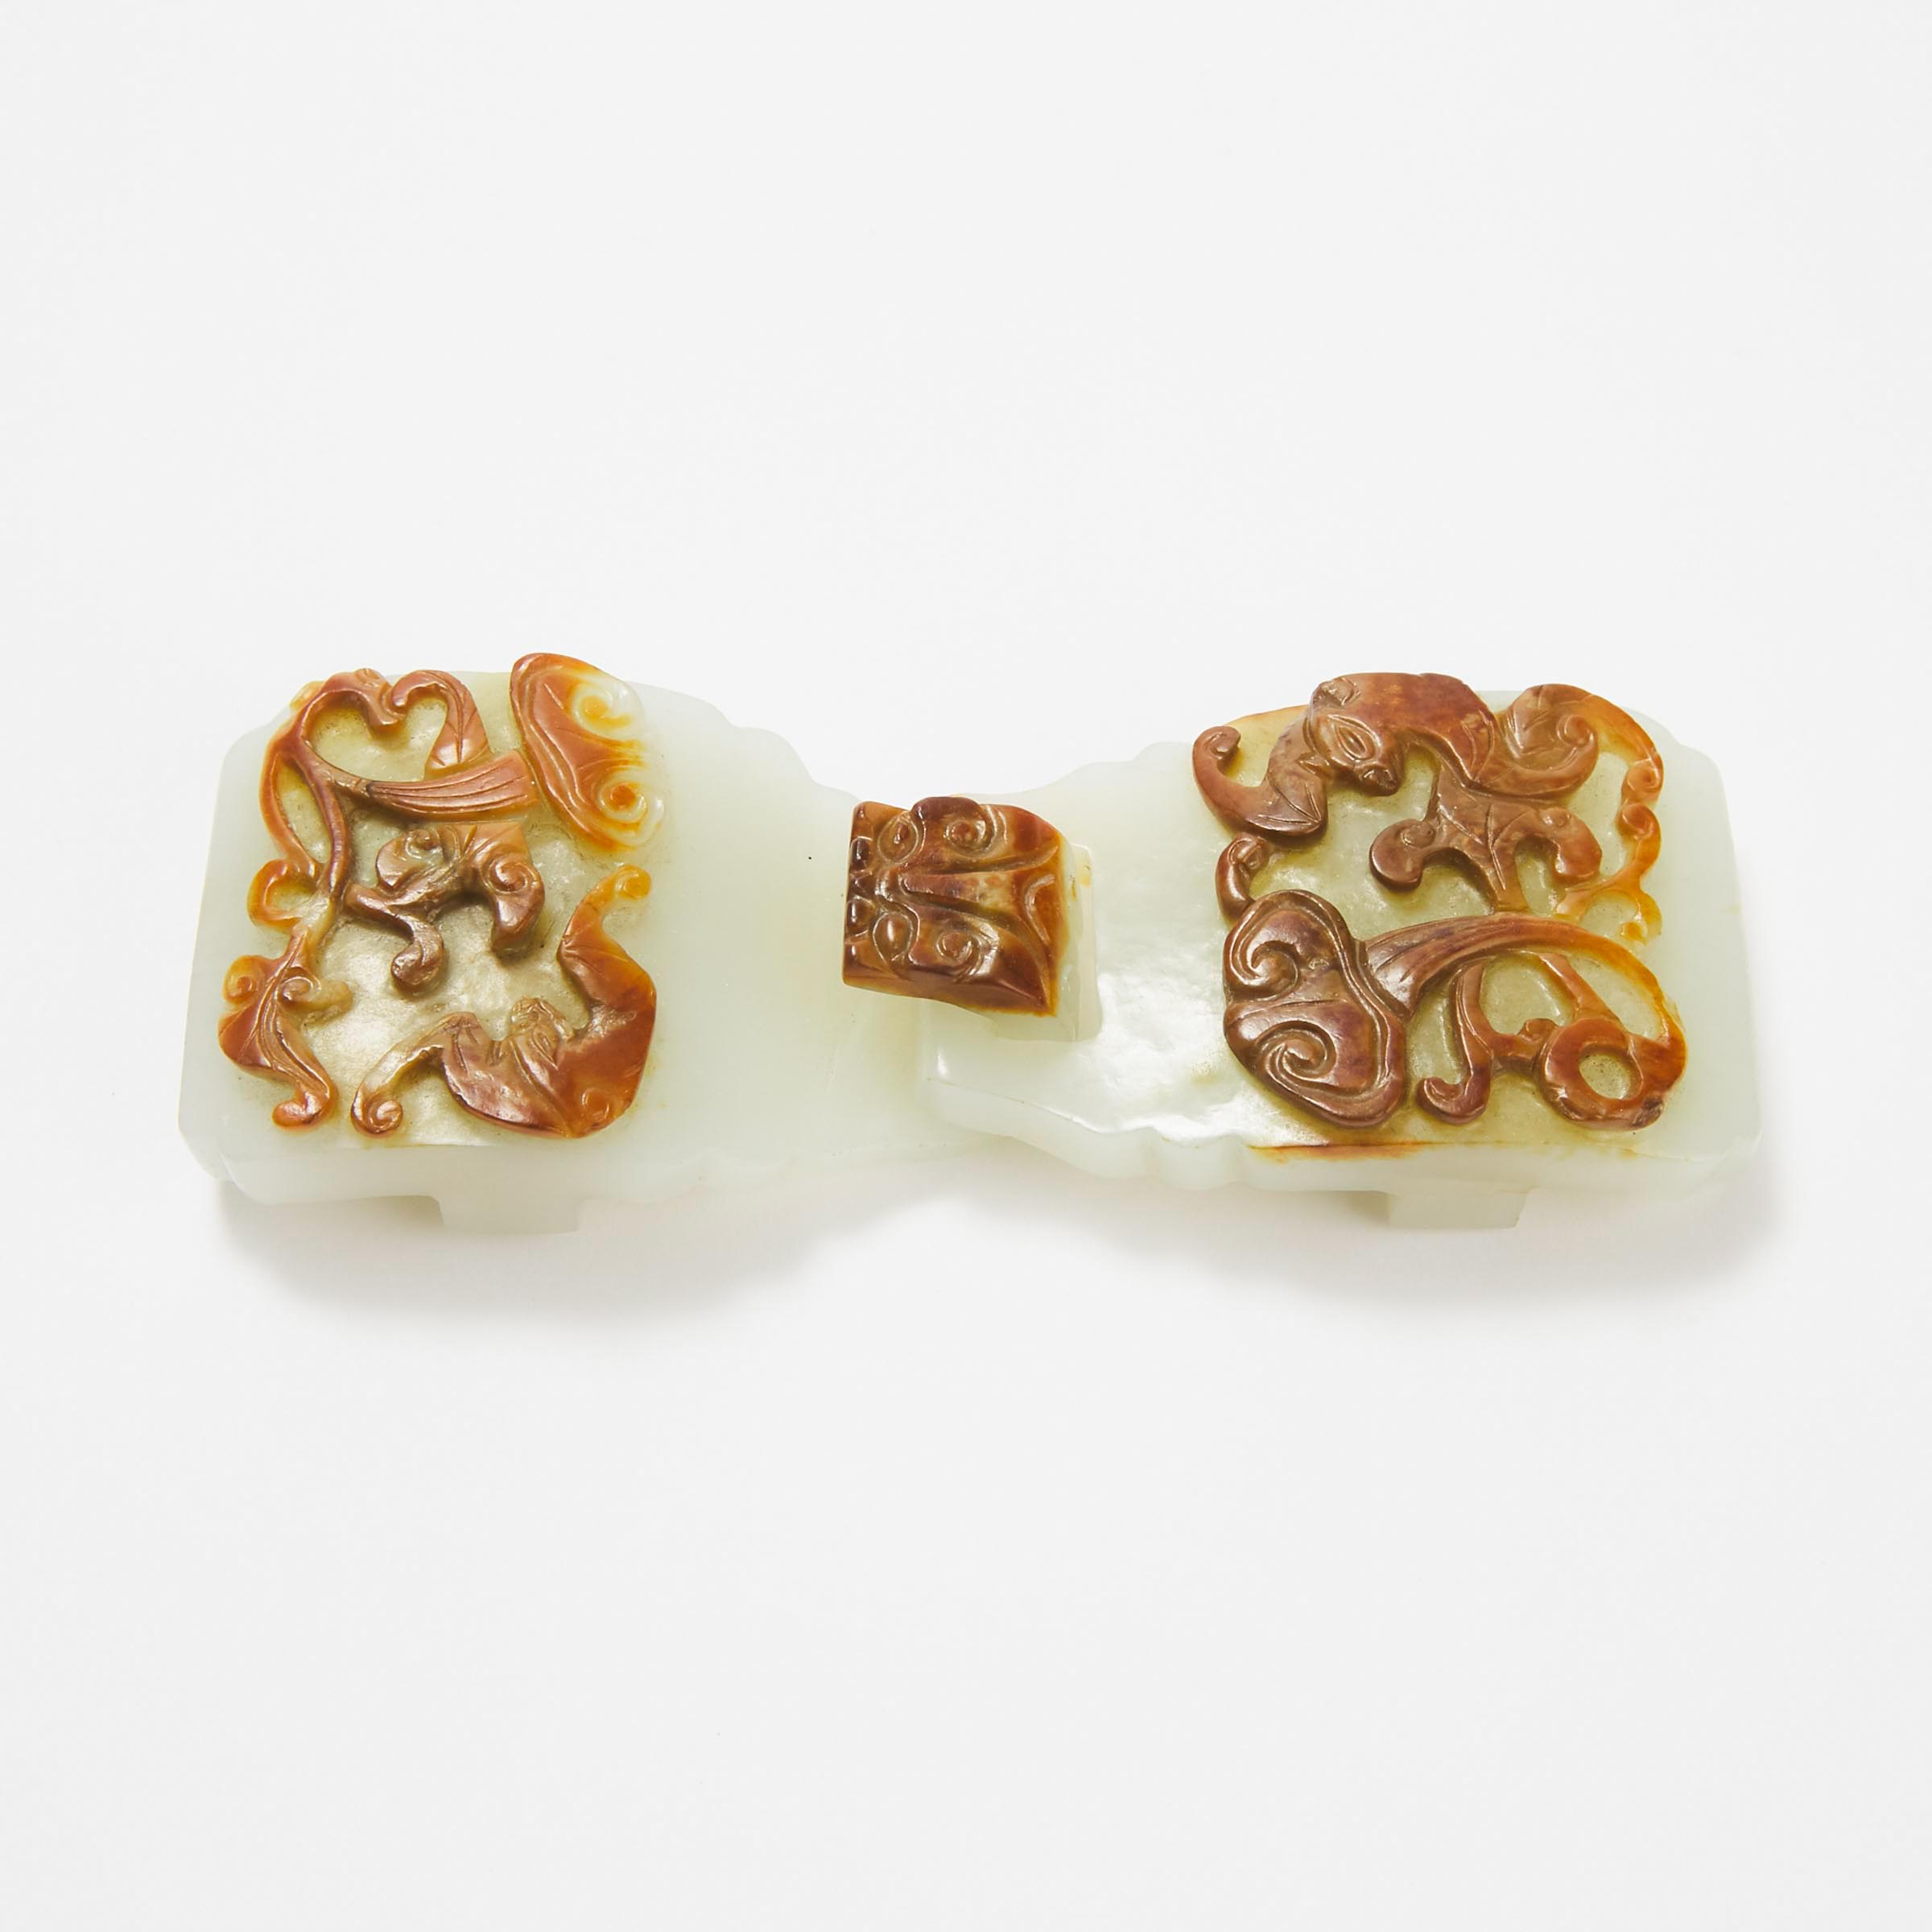 A Carved and Pierced White and Russet Jade Belt Buckle, 18th Century